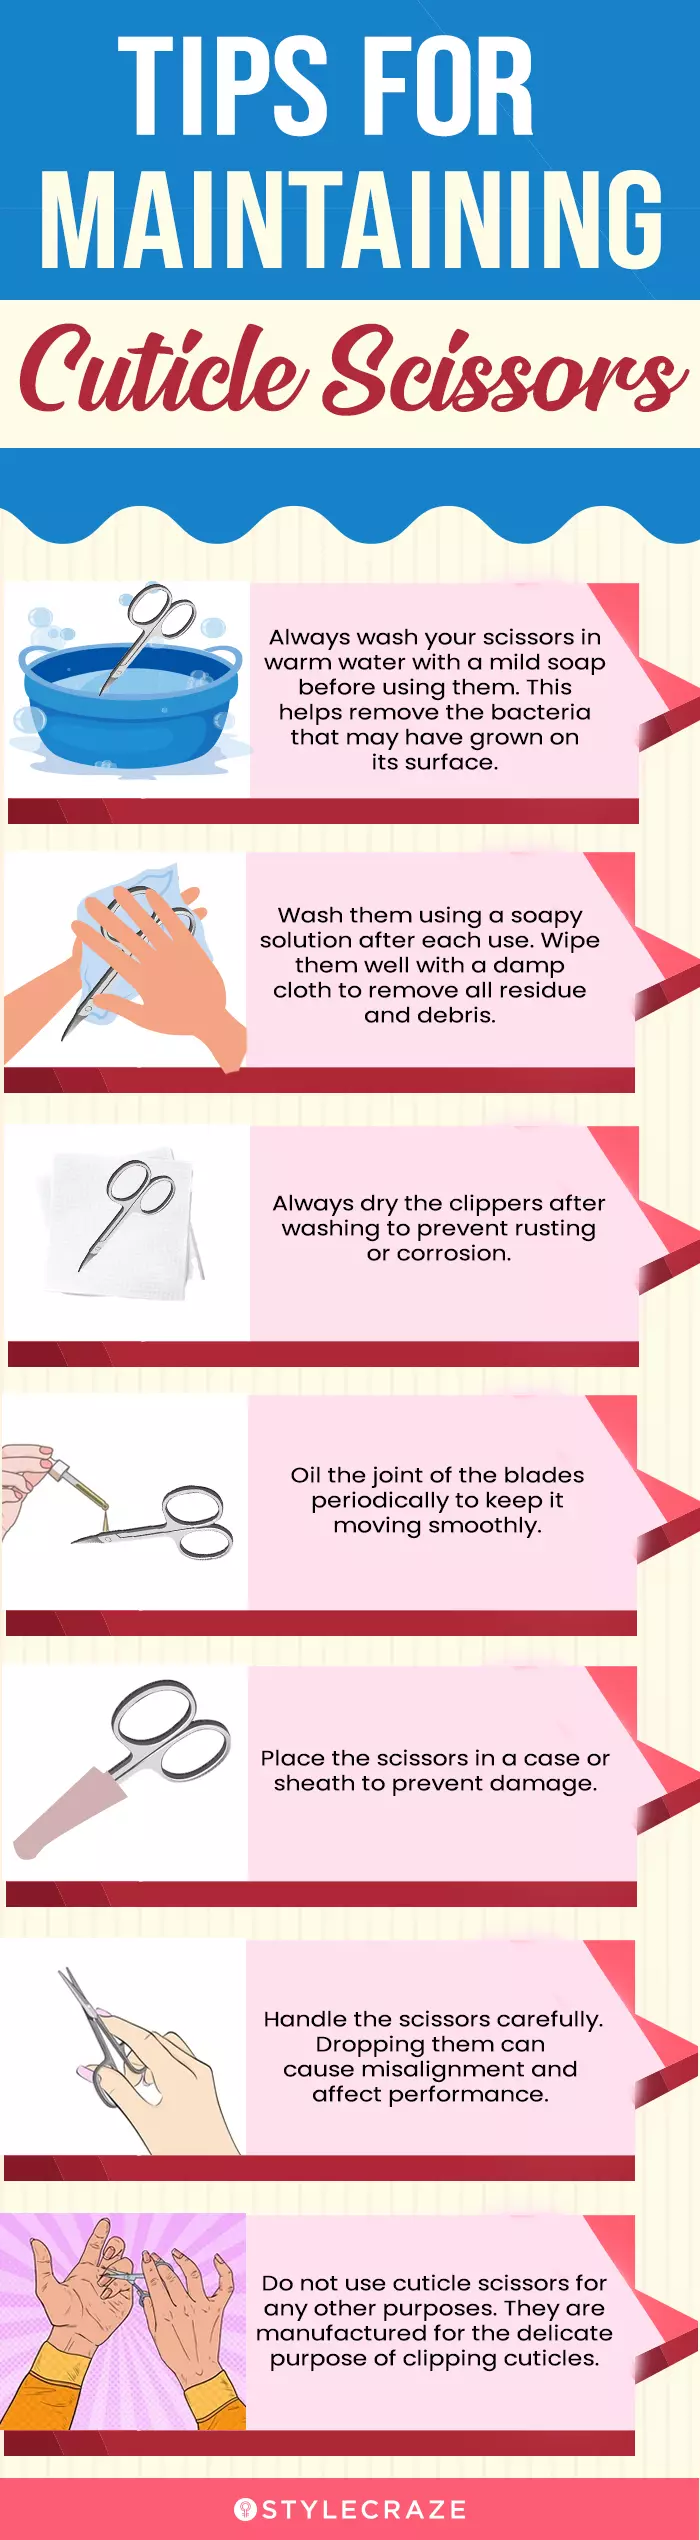 Tips For Maintaining Cuticle Scissors (infographic)